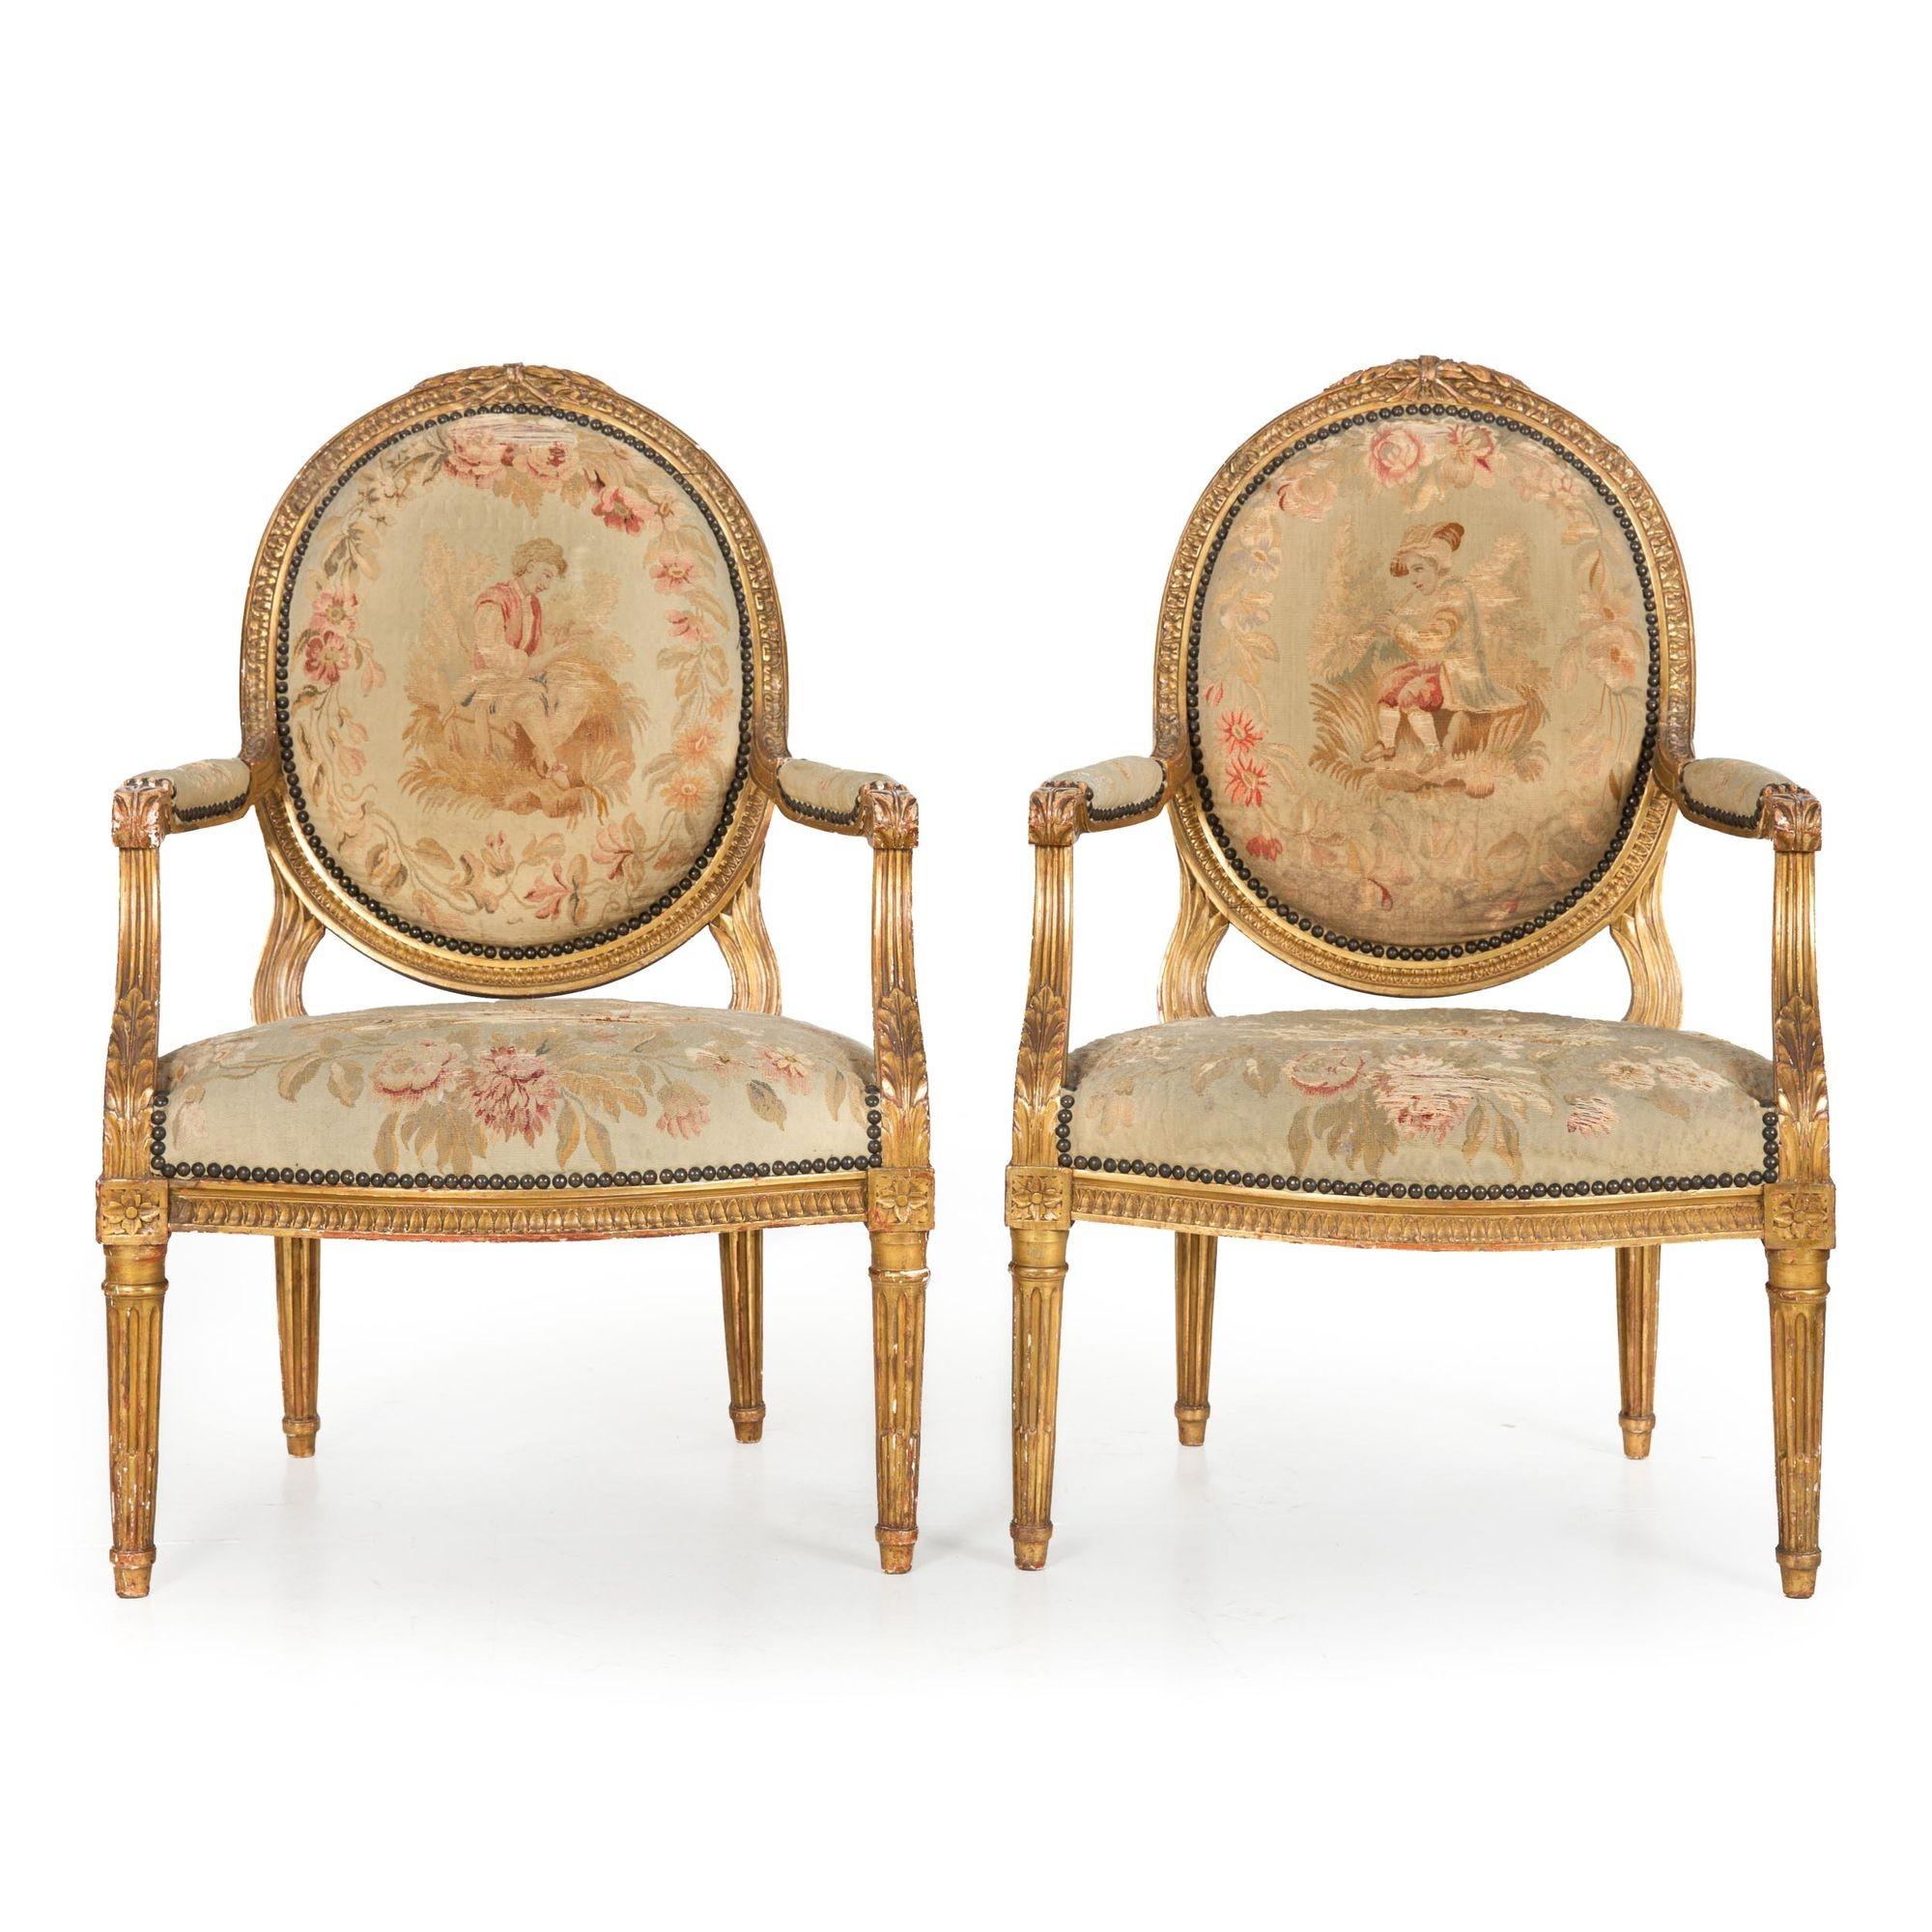  
A lovely 19th century pair of fauteuils in the typical Louis XVI taste with nicely carved solid beechwood frames covered in a thin layer of gesso over which a layer of red bole was applied before being overall gilded. The gilding has tarnished and